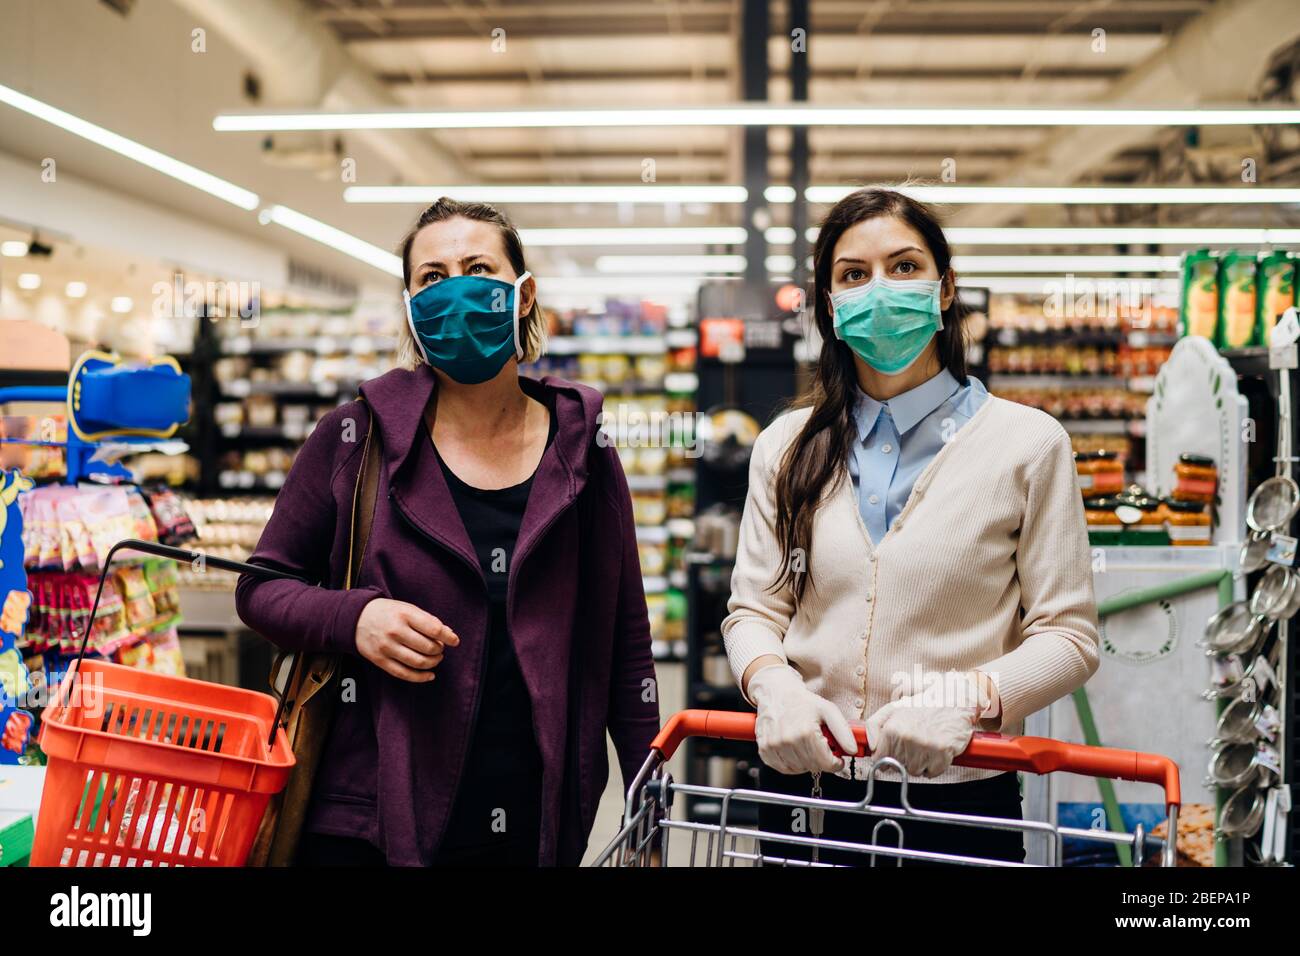 Shoppers with masks buying for groceries due to coronavirus pandemic in grocery store.COVID-19 food shopping.Quarantine preparation.Panic buying and s Stock Photo